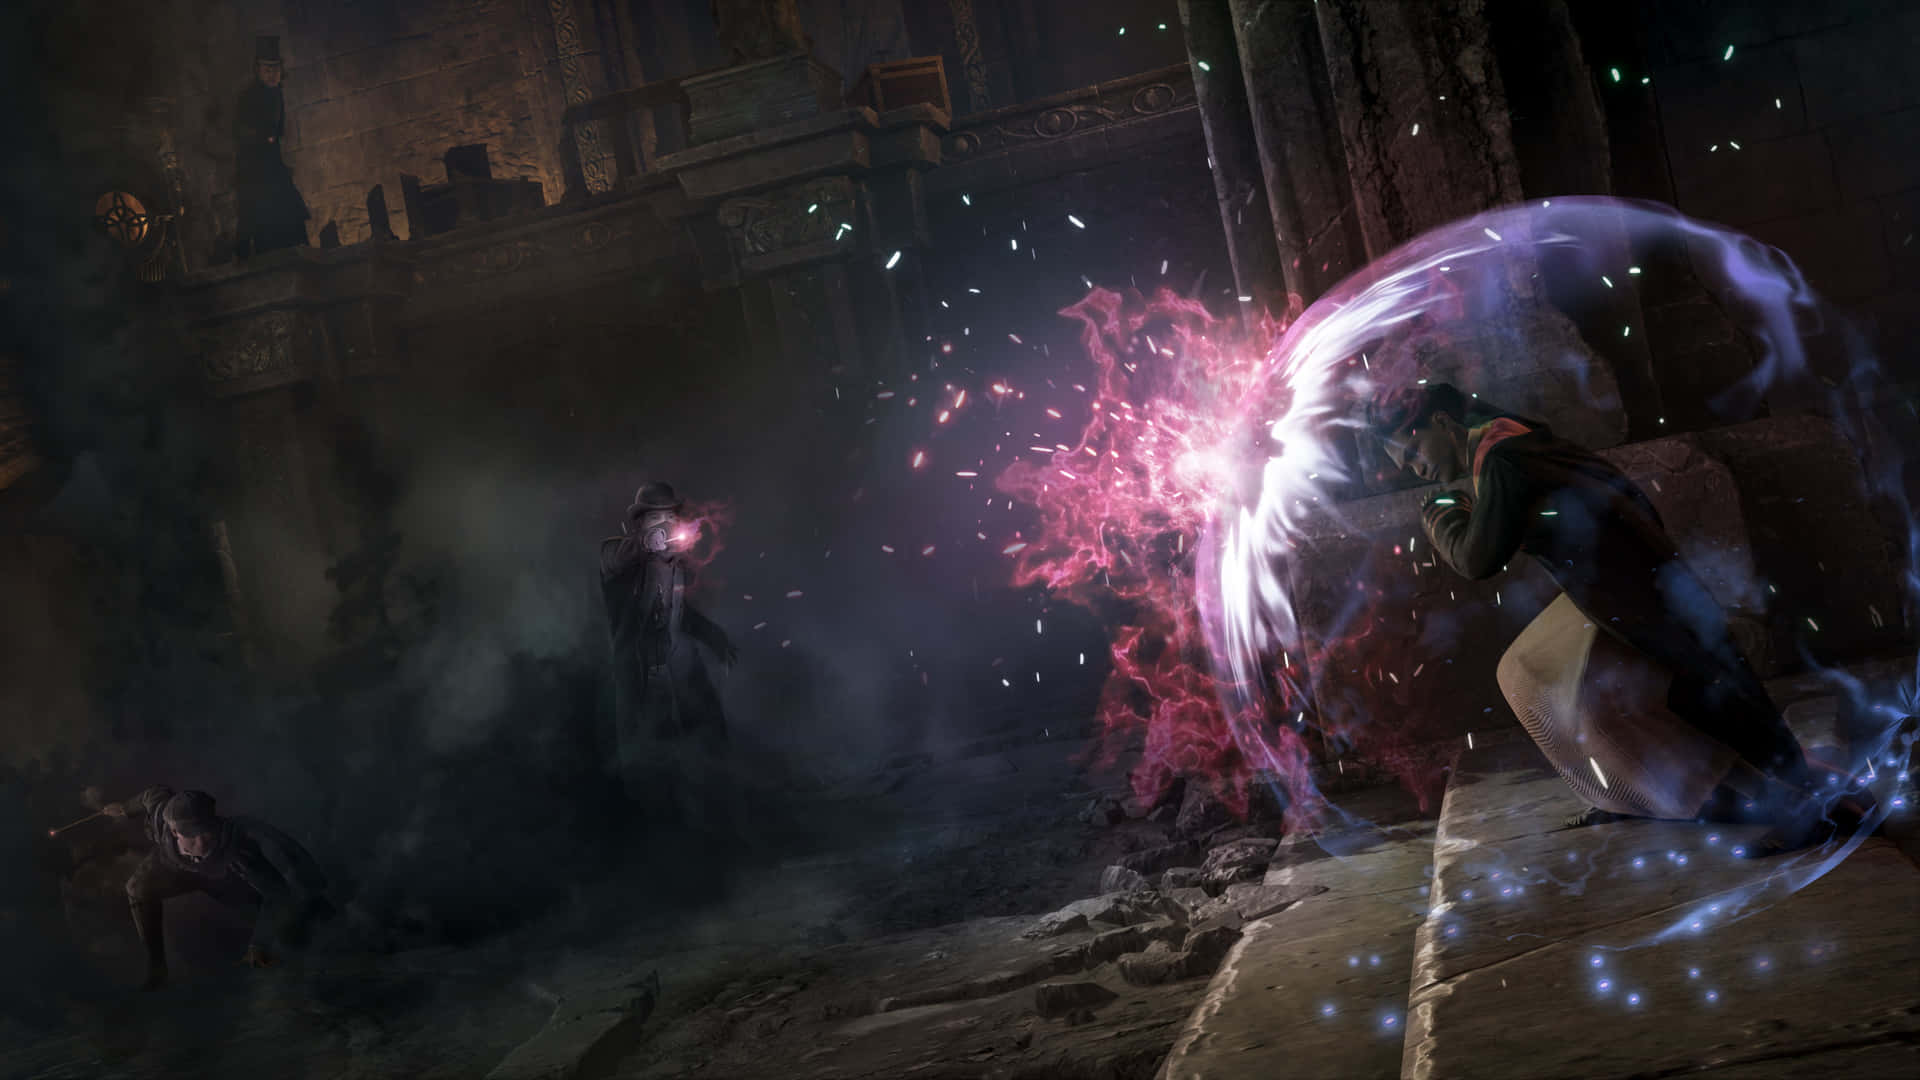 The Hogwarts Potions Class is the perfect place to develop your magical skills! Wallpaper